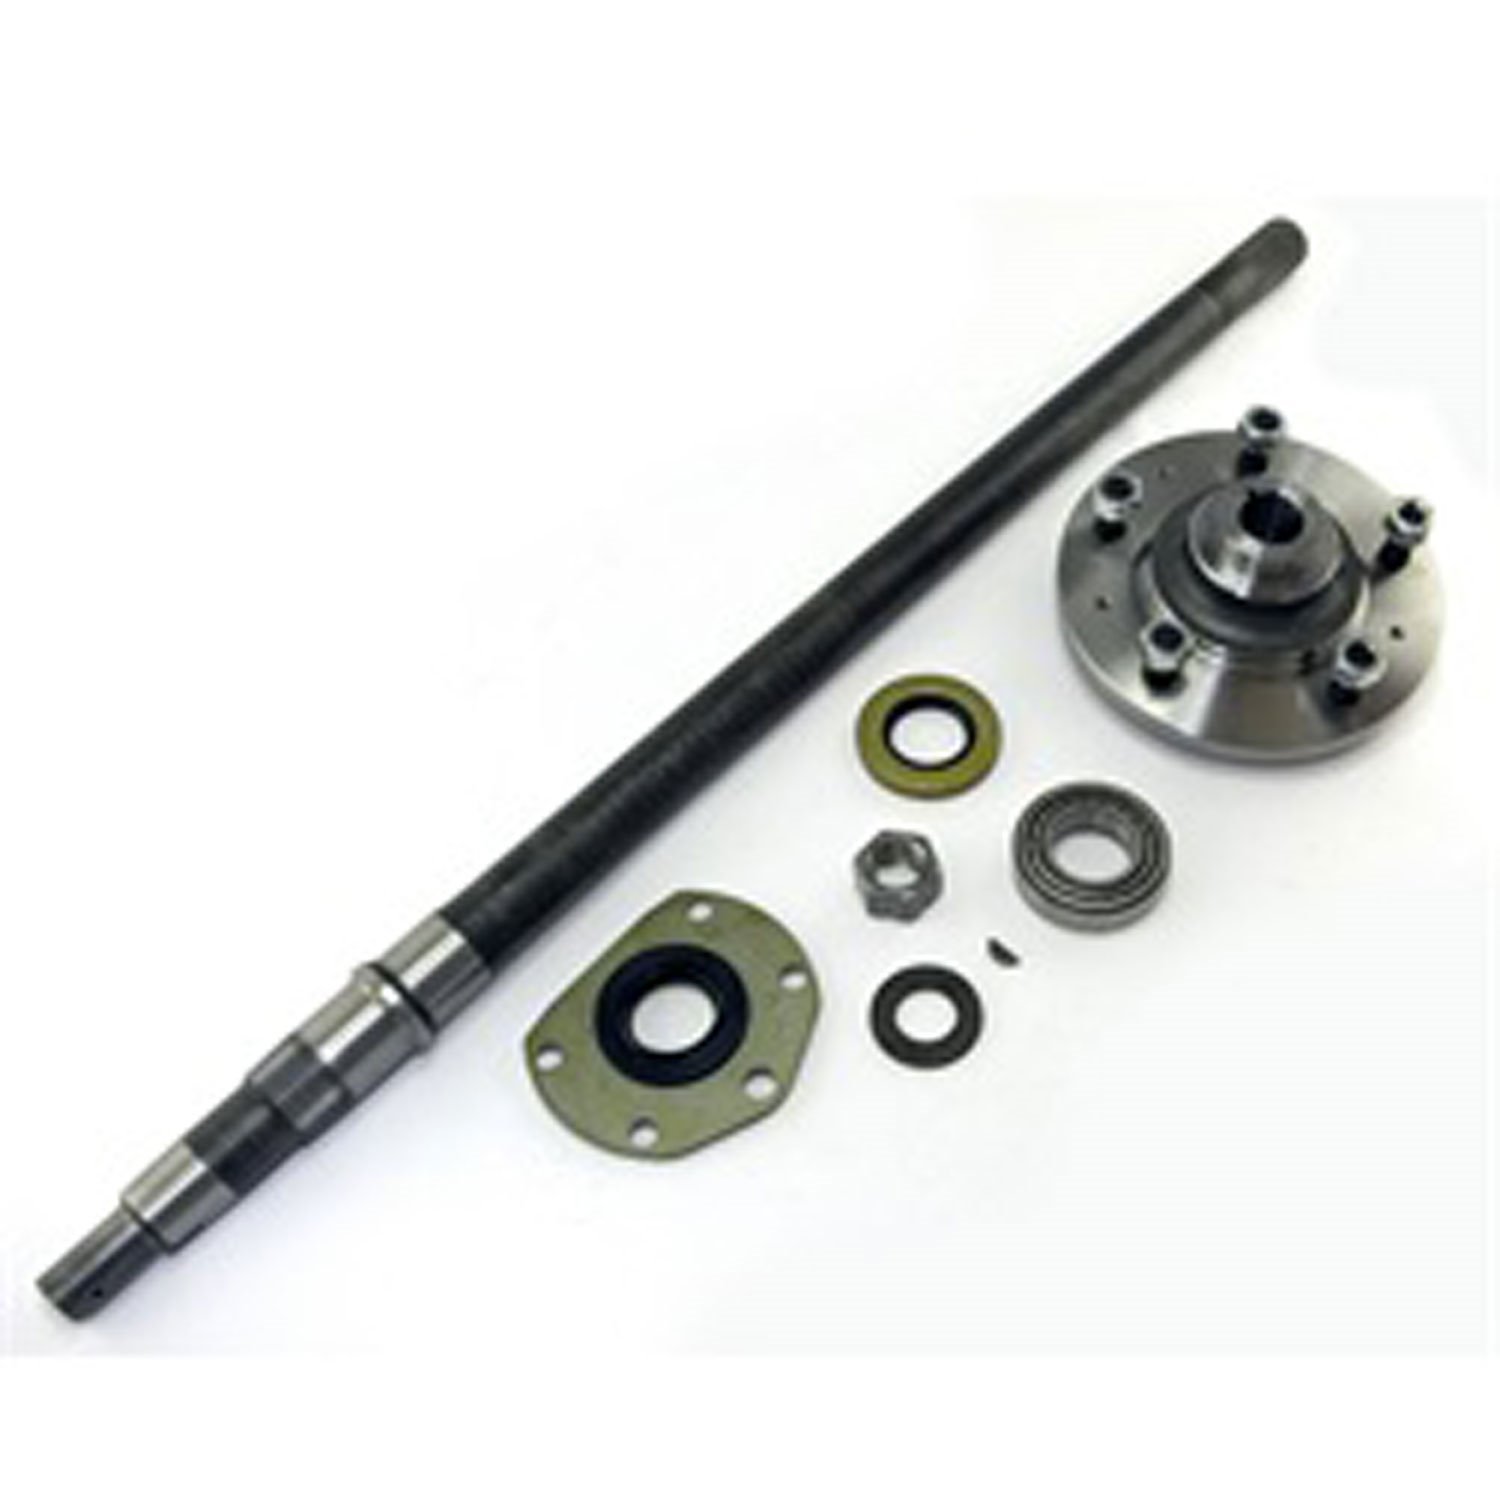 Axle Shaft AMC20 Wide Track RH 31.5 inch Includes Axle Hub Bearing Cup Inner/Outer Seal Nut Washer Key 82-86 CJ7 82-86 CJ8